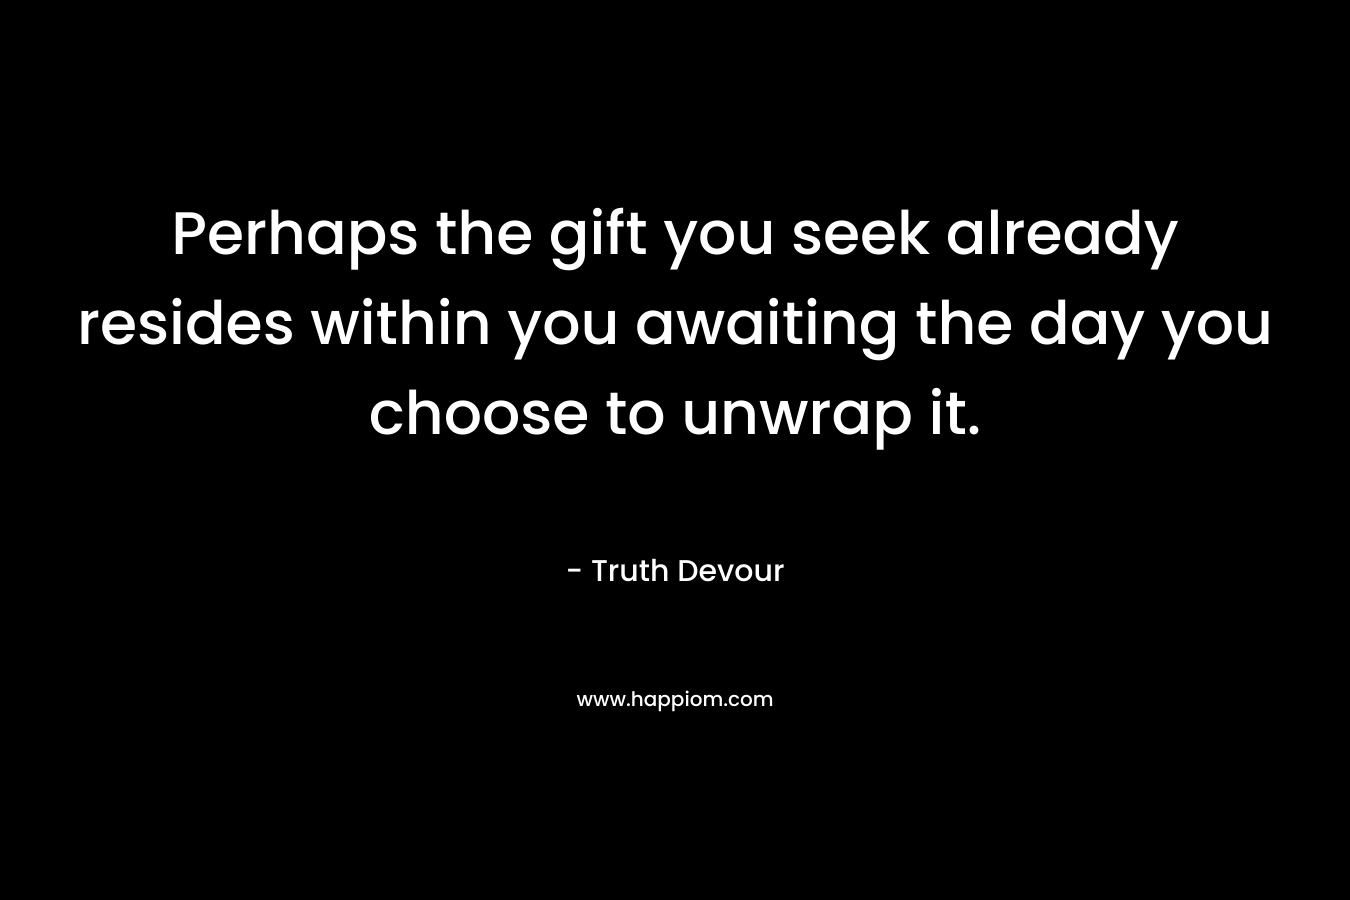 Perhaps the gift you seek already resides within you awaiting the day you choose to unwrap it.